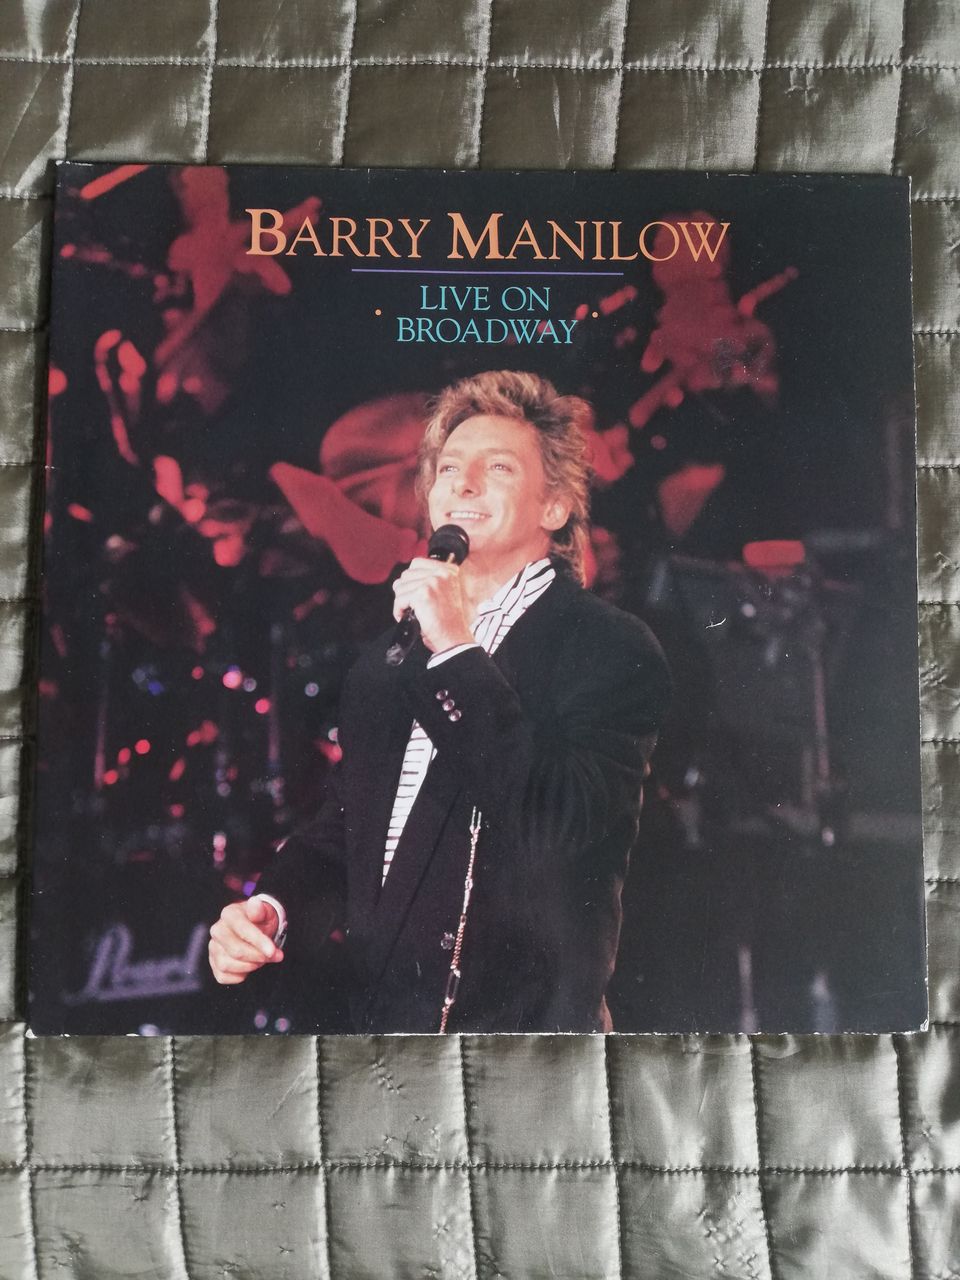 Barry manilow Live On Broadway tupla-LP levy 1990